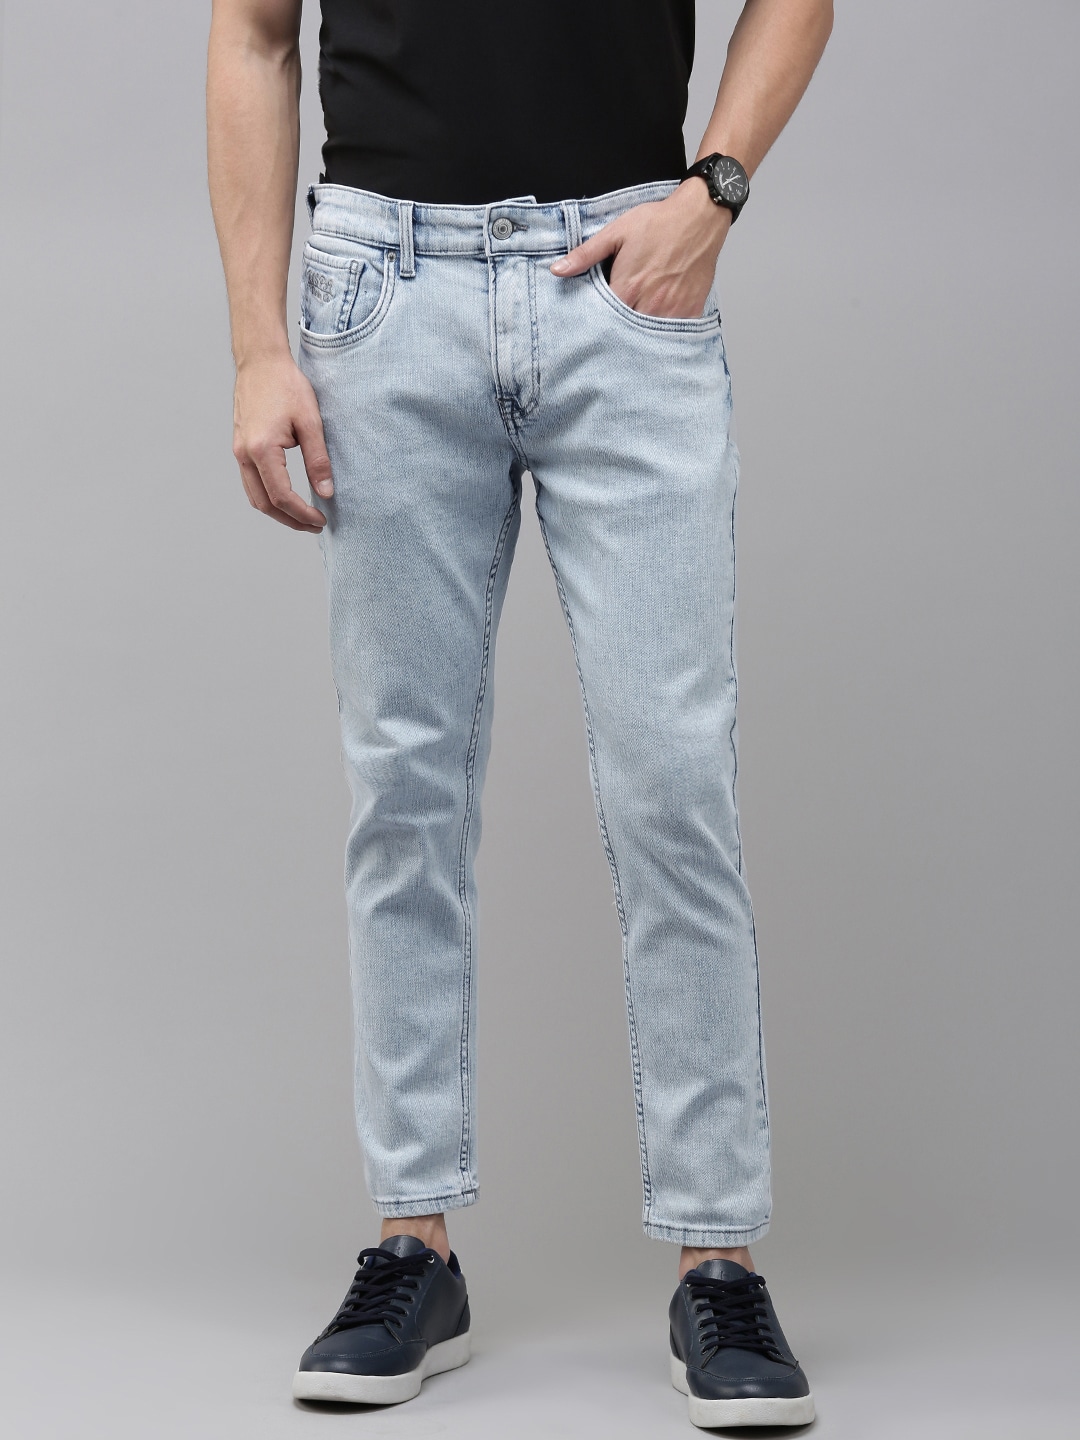 U.S. Polo Assn. Denim Co. Men Heavy Fade Stretchable Mid-Rise Jeans